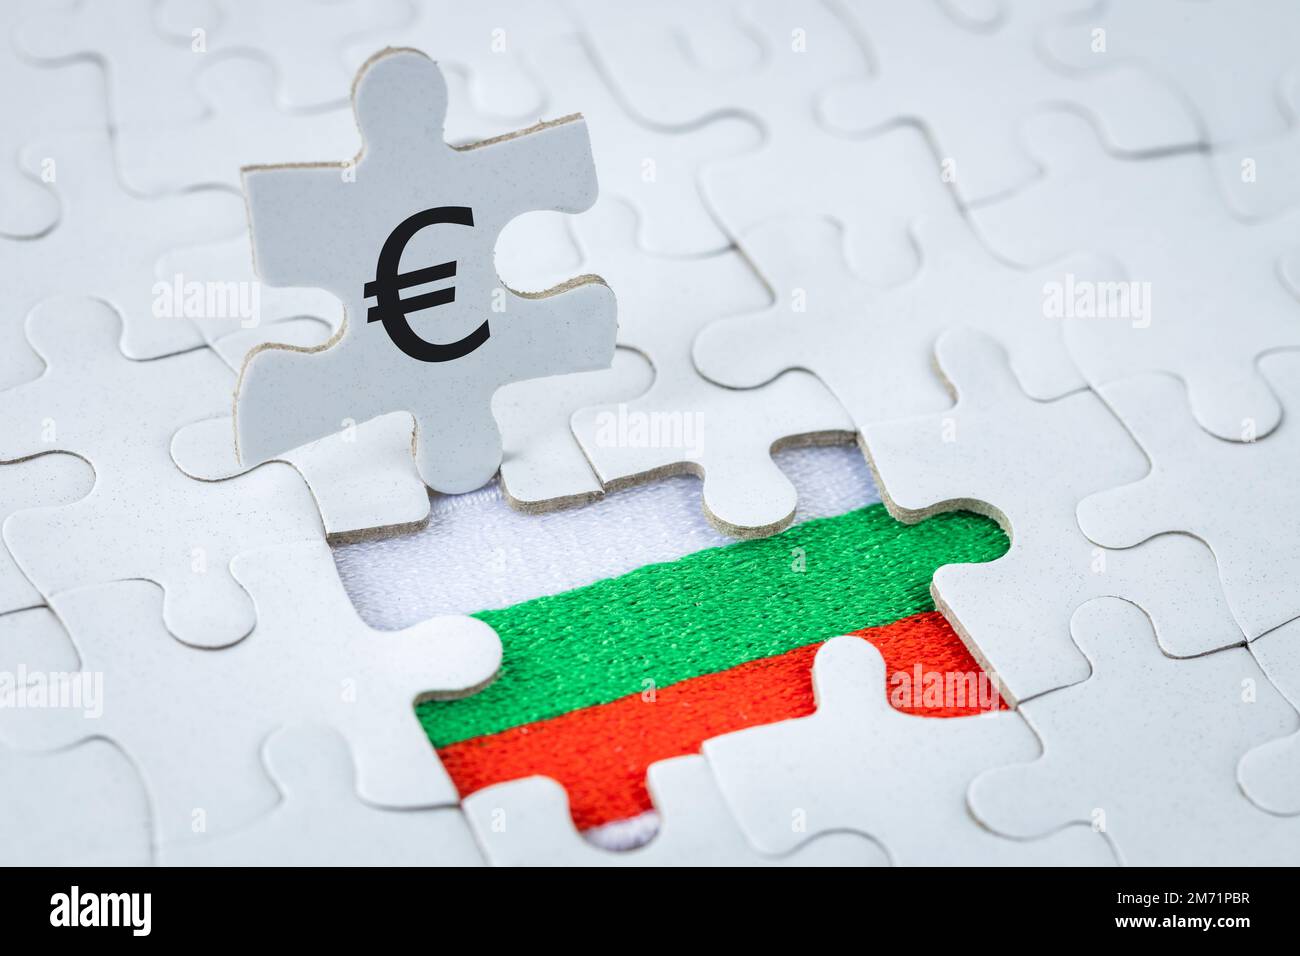 flag of bulgaria and Euro symbol, jigsaw puzzle, Common currency of the European Union, Business concept, Adoption of bulgaria into the euro zone Stock Photo